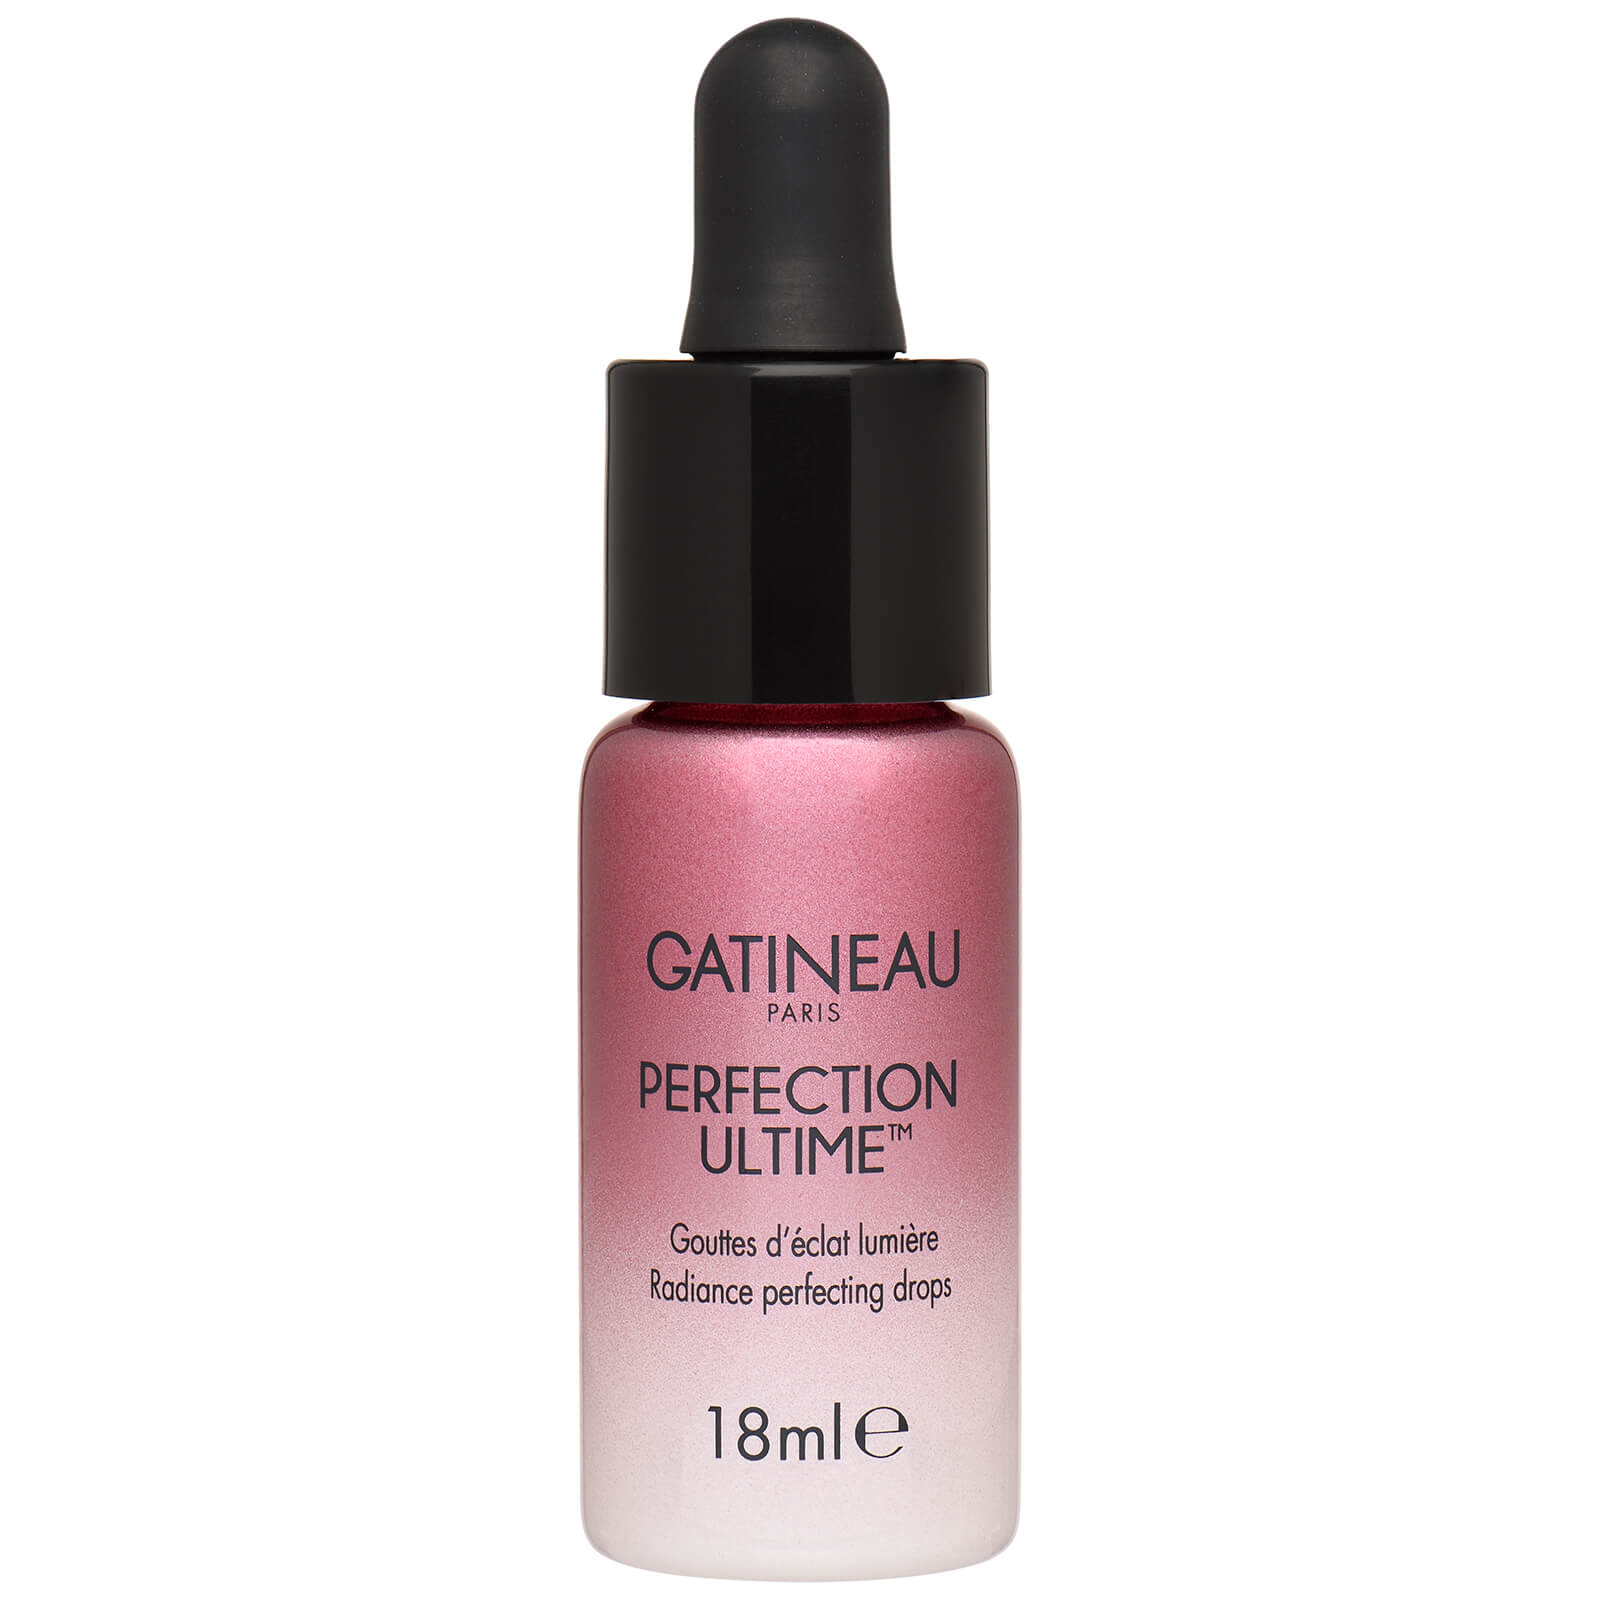 Gatineau perfection ultime radiance perfecting drops